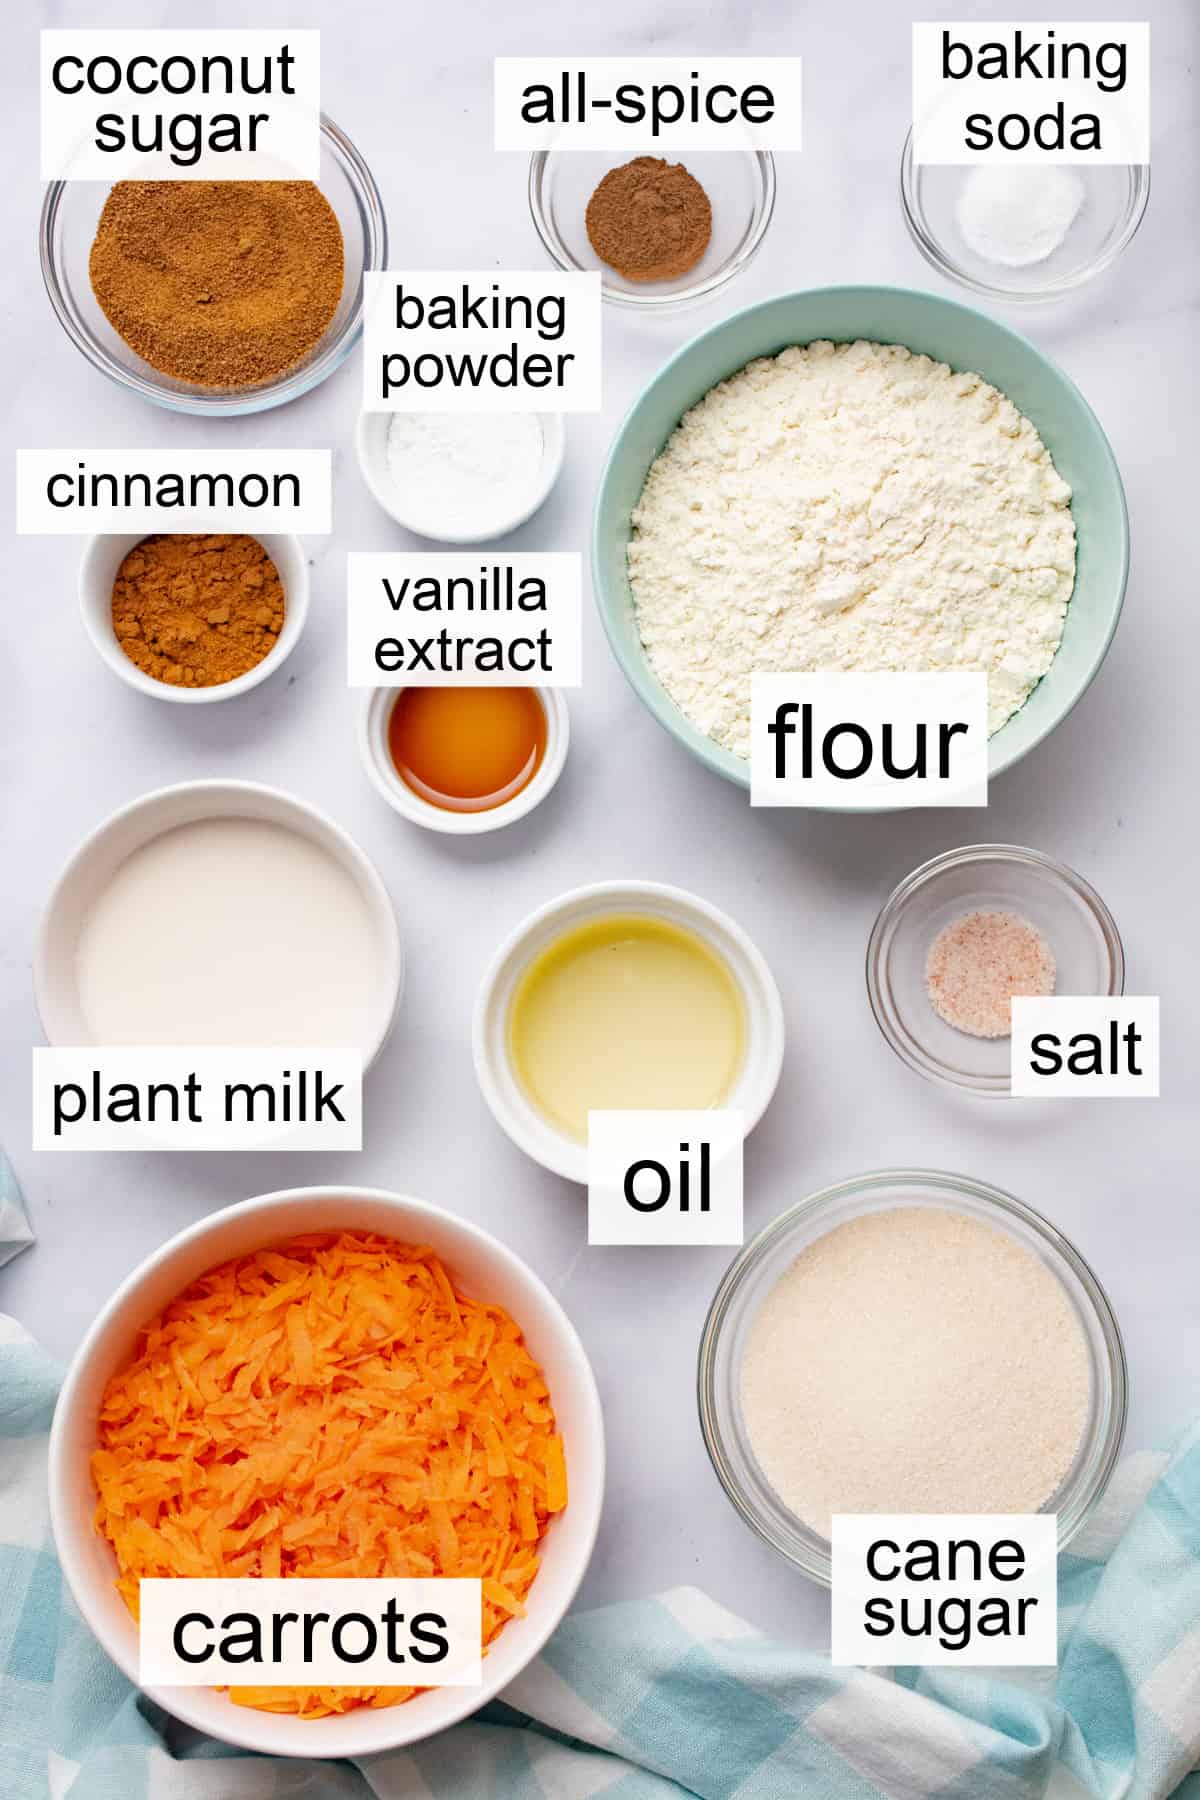 Vegan carrot cake ingredients in separate bowls and labeled.